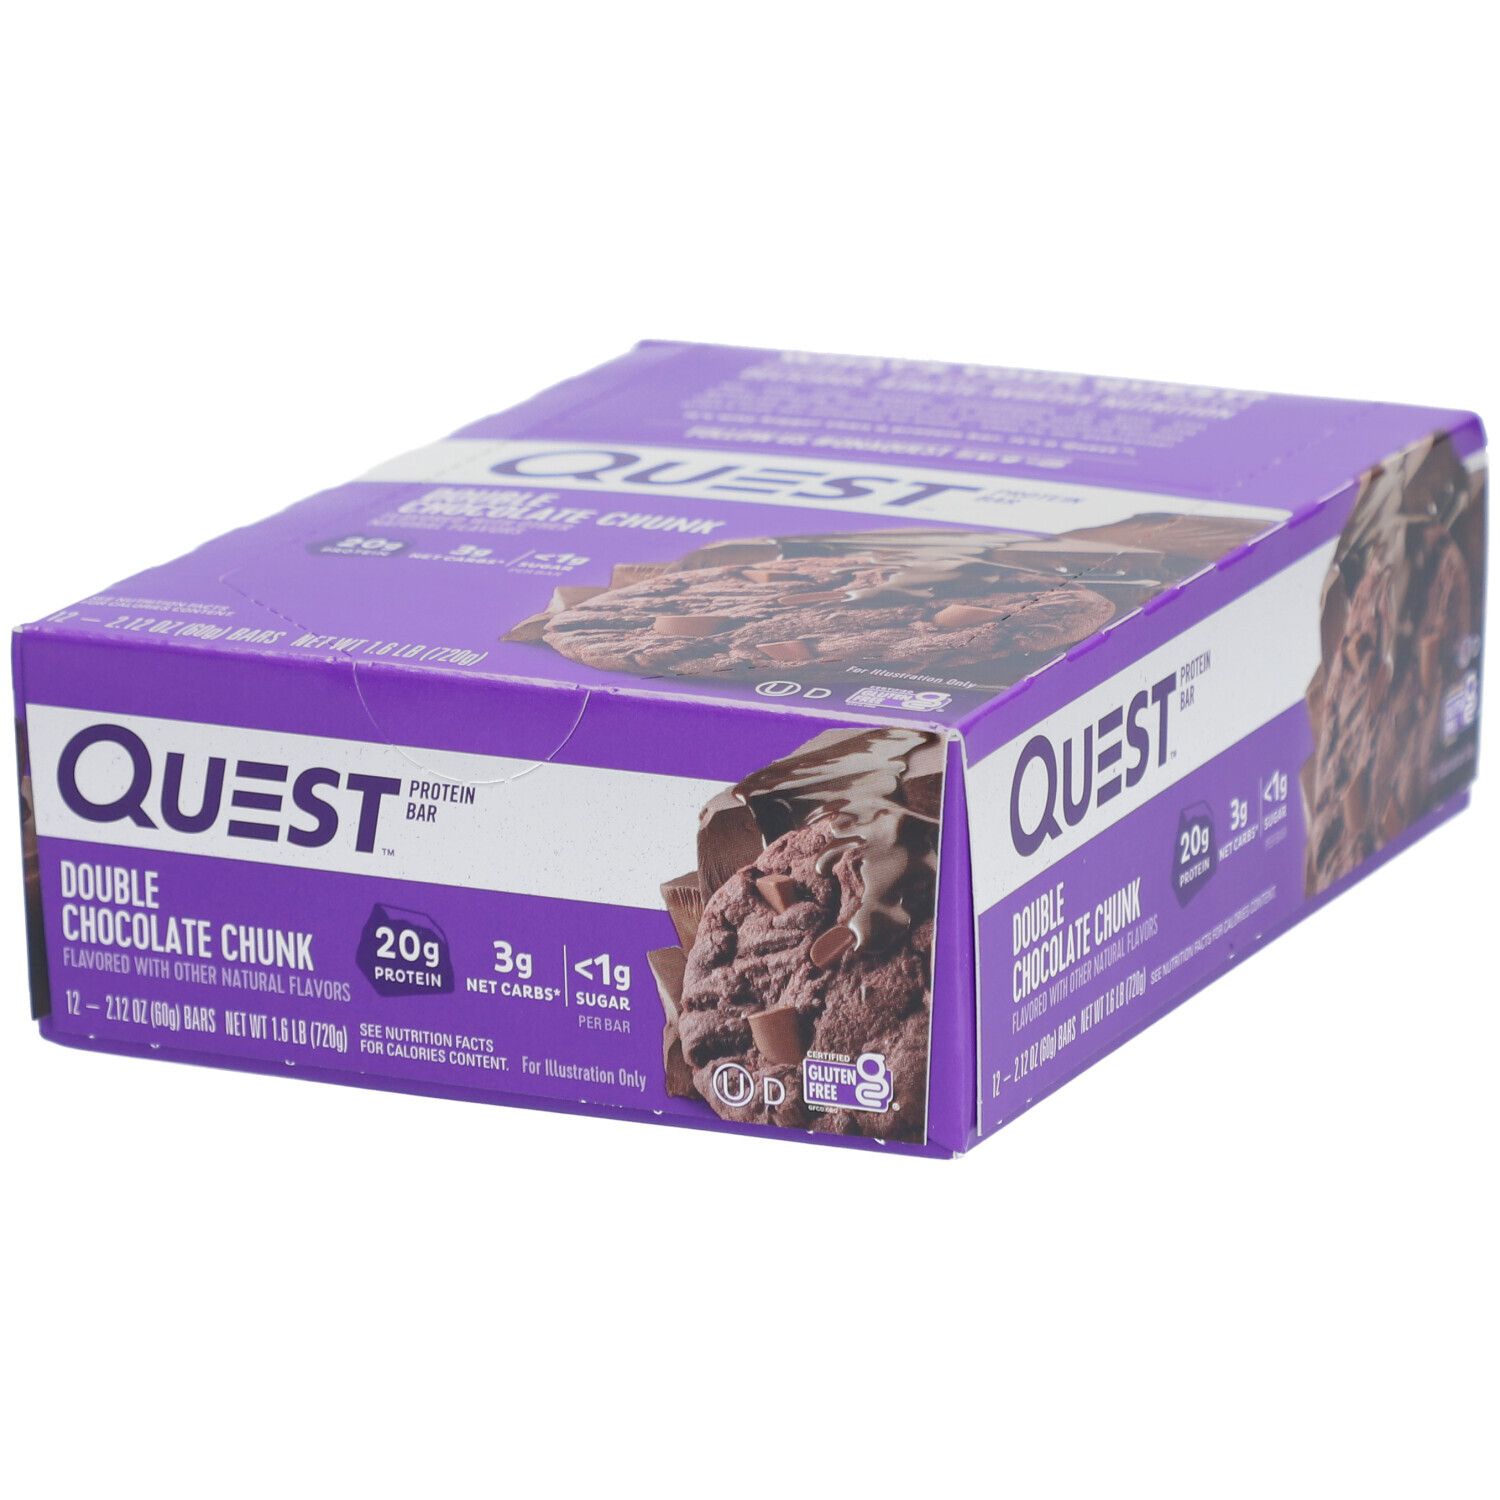 QuestBAR® Double Chocolate Chunk